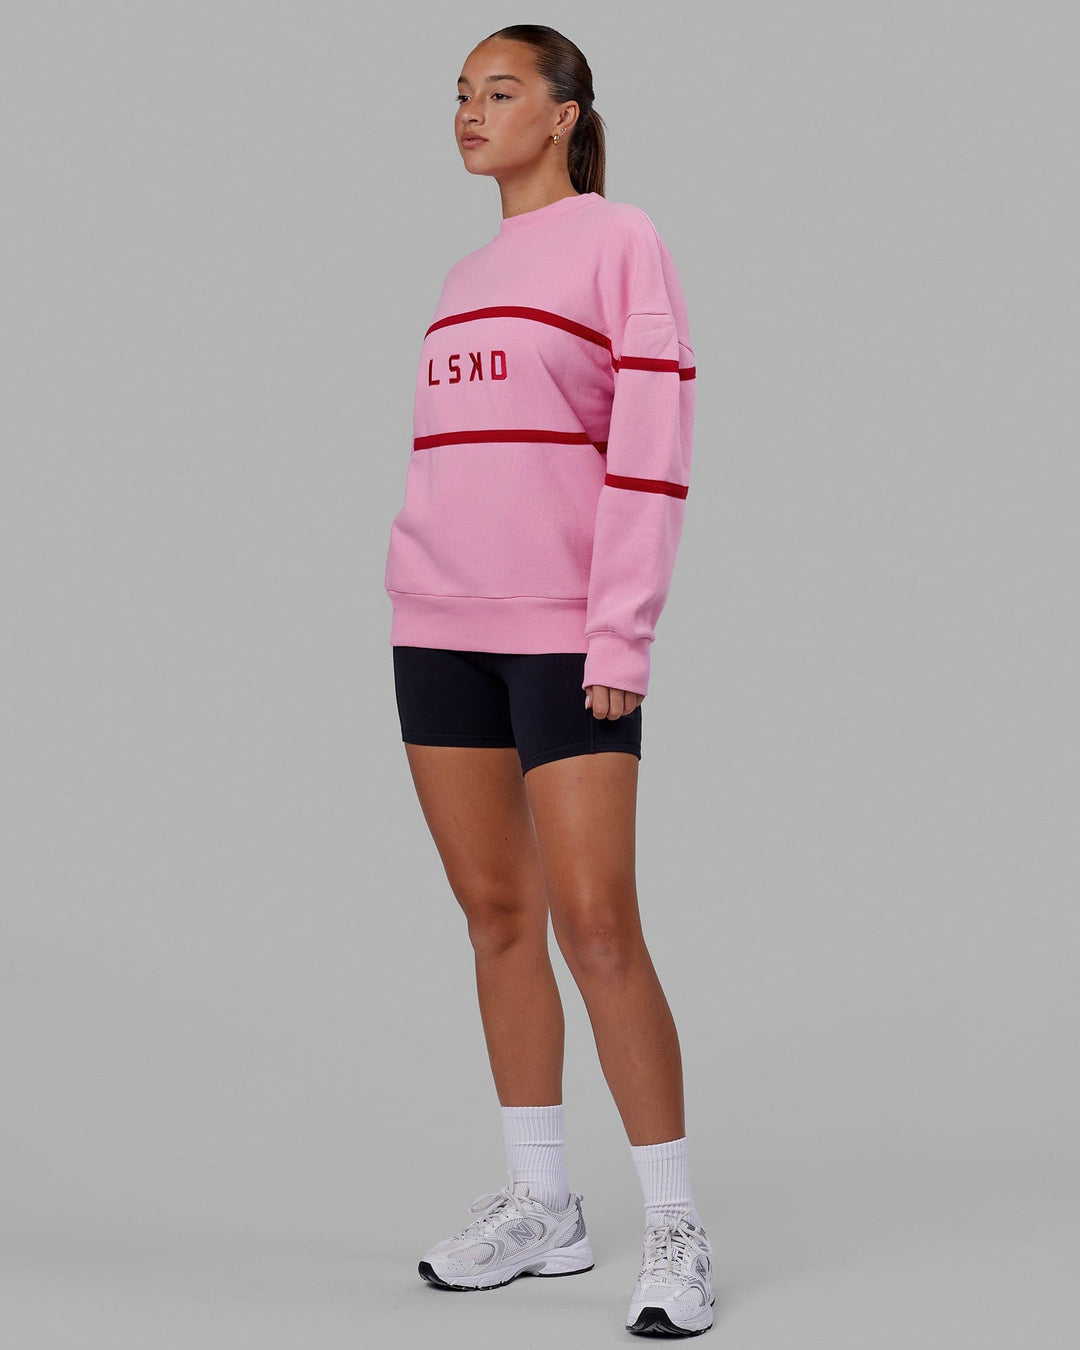 Woman wearing Unisex Parallel Sweater Oversize - Pink Frosting